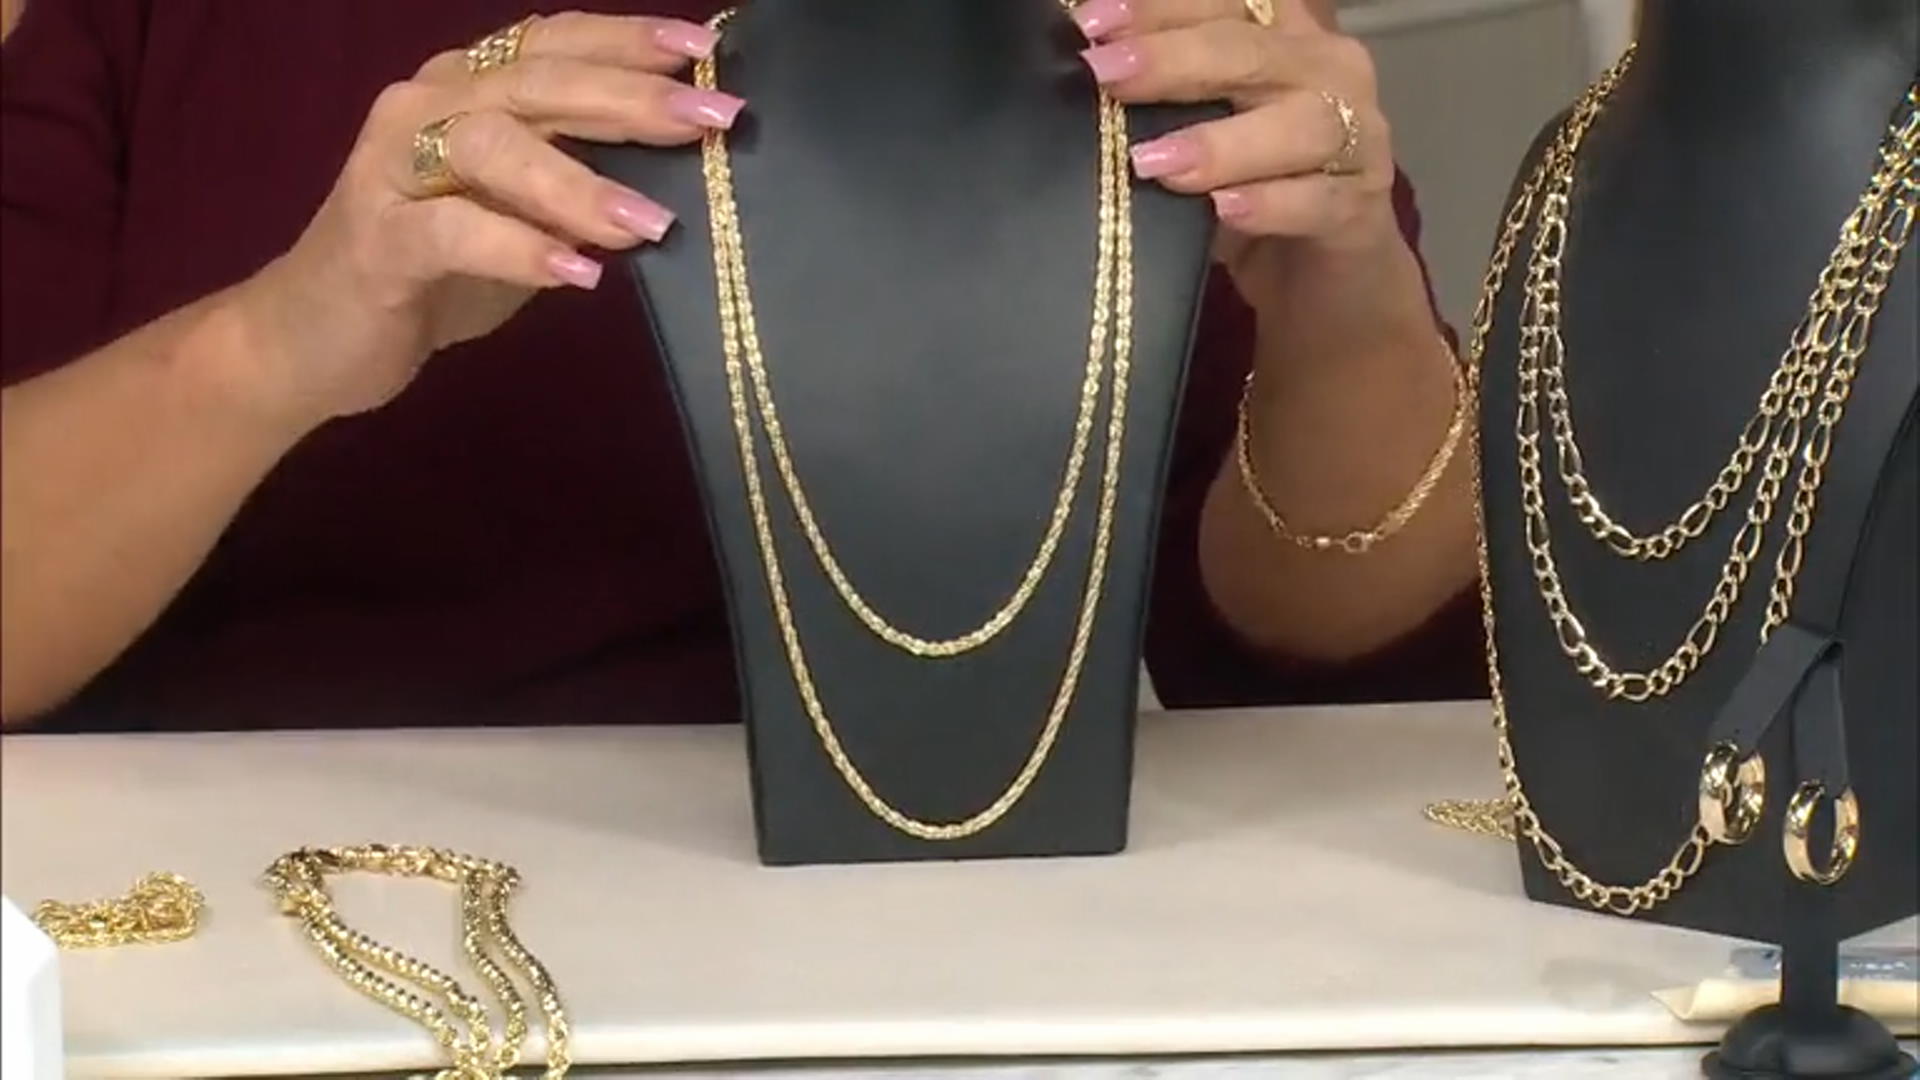 10K Yellow Polished Gold 3MM Rope Chain 20 Inch Necklace Video Thumbnail